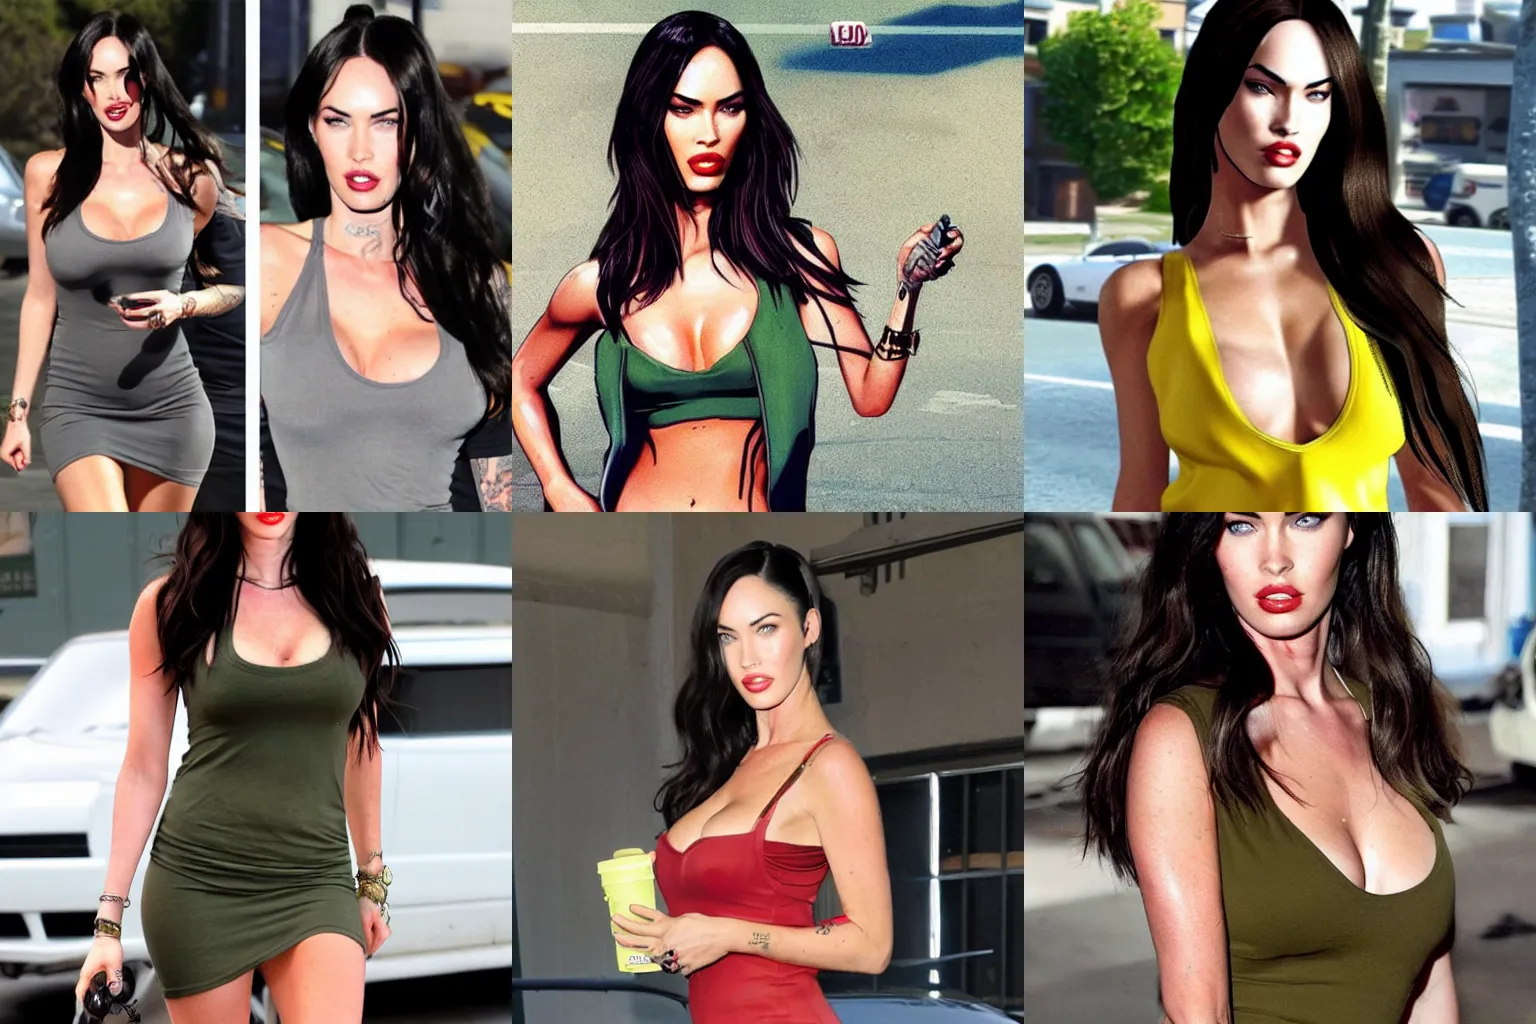 Prompt: Megan fox in the style of GTA, grand theft auto, low cut top, short dress, large breasts